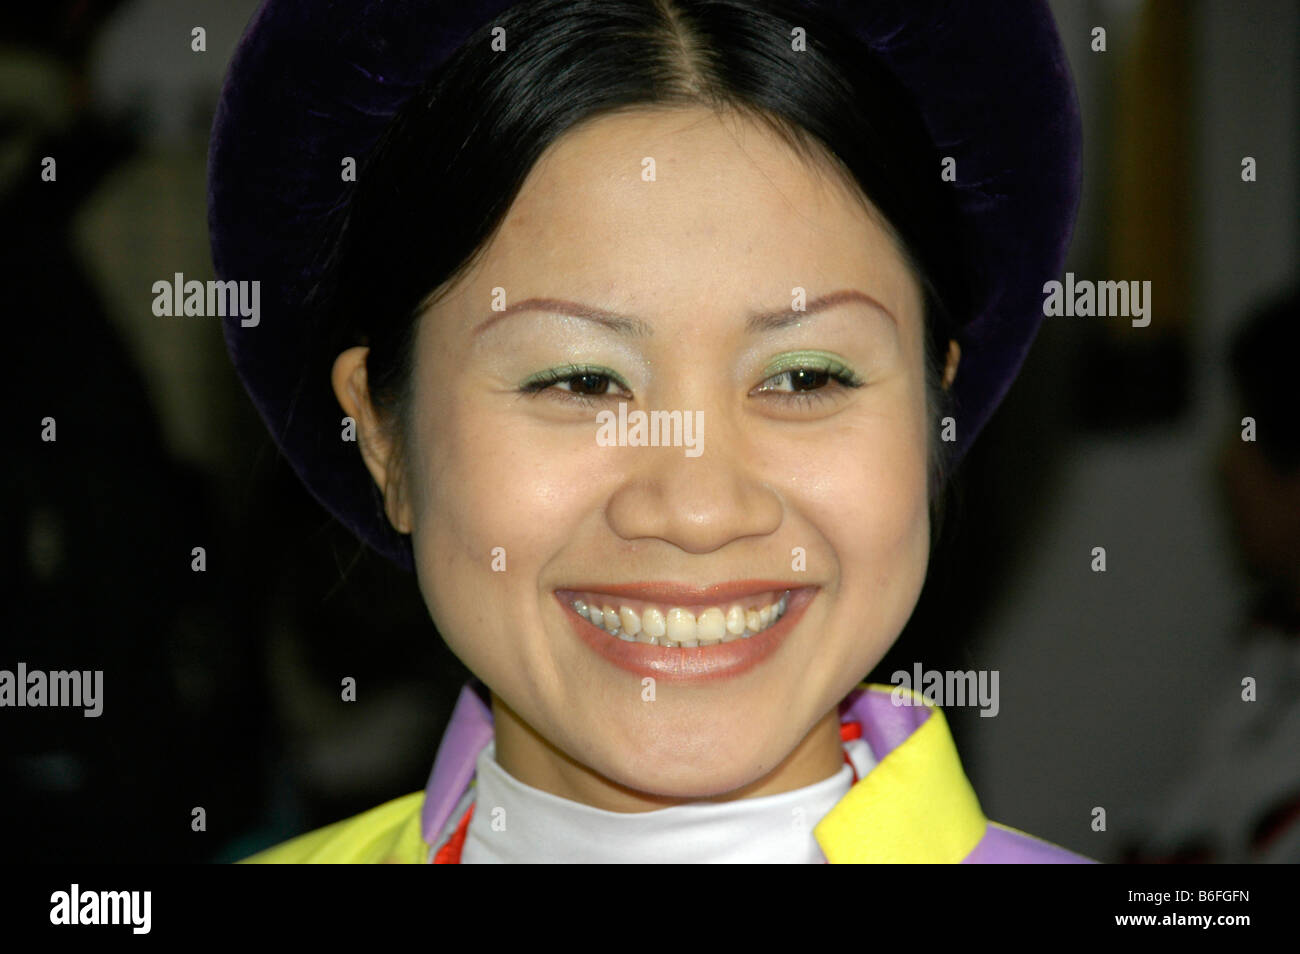 Portrait of a smiling young woman in traditional dress, Hanoi, Vietnam, Southeast Asia Stock Photo